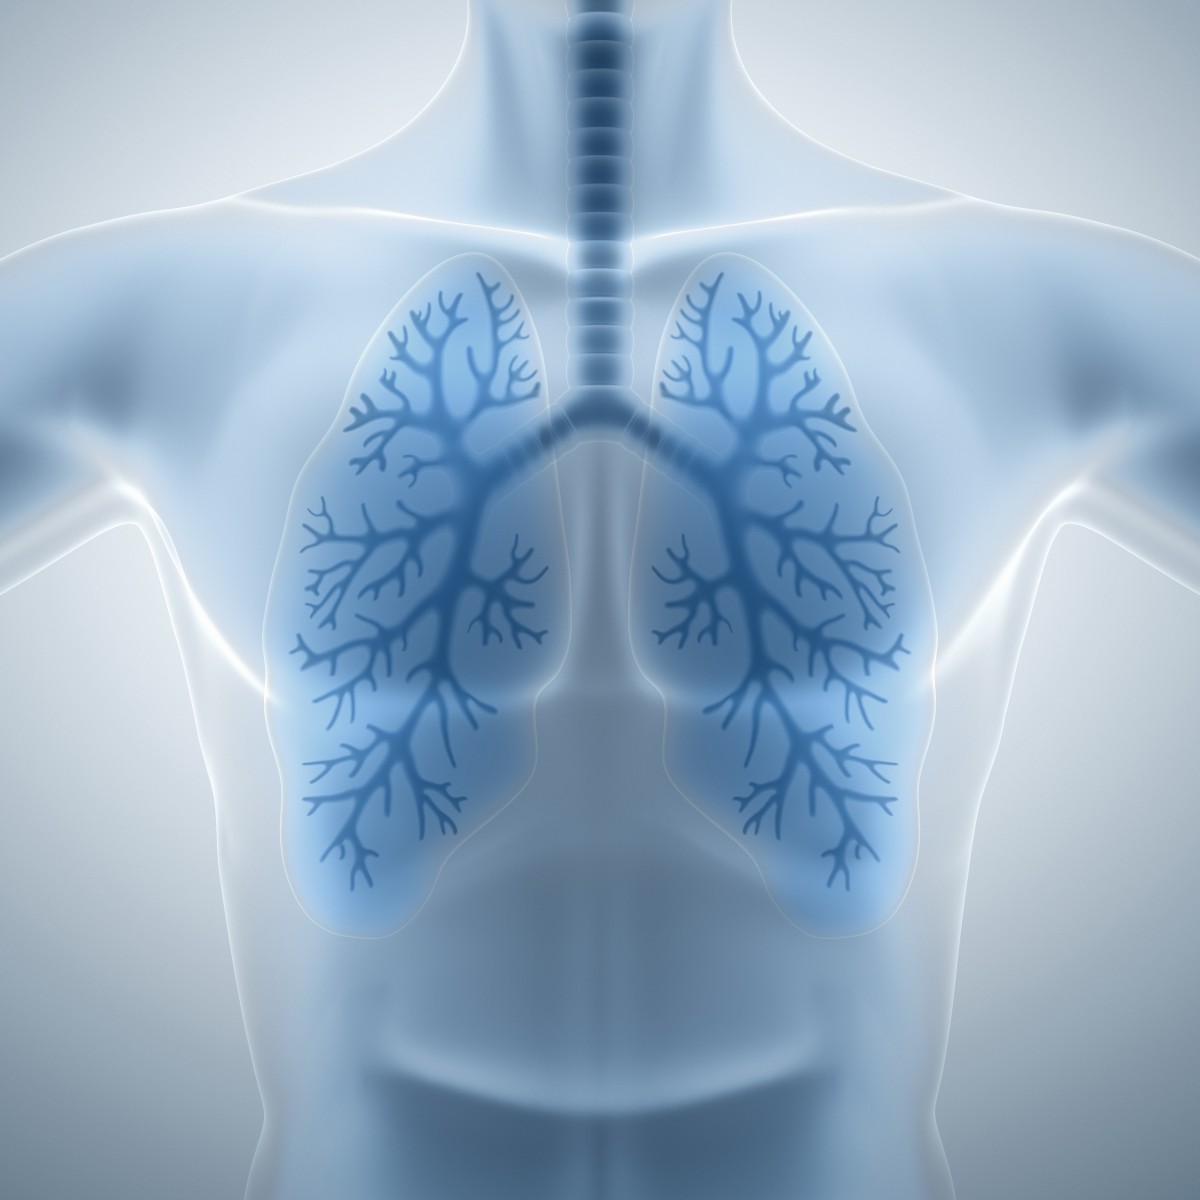 Lung Cancer Survival Much Lower Than Other Invasive Cancers